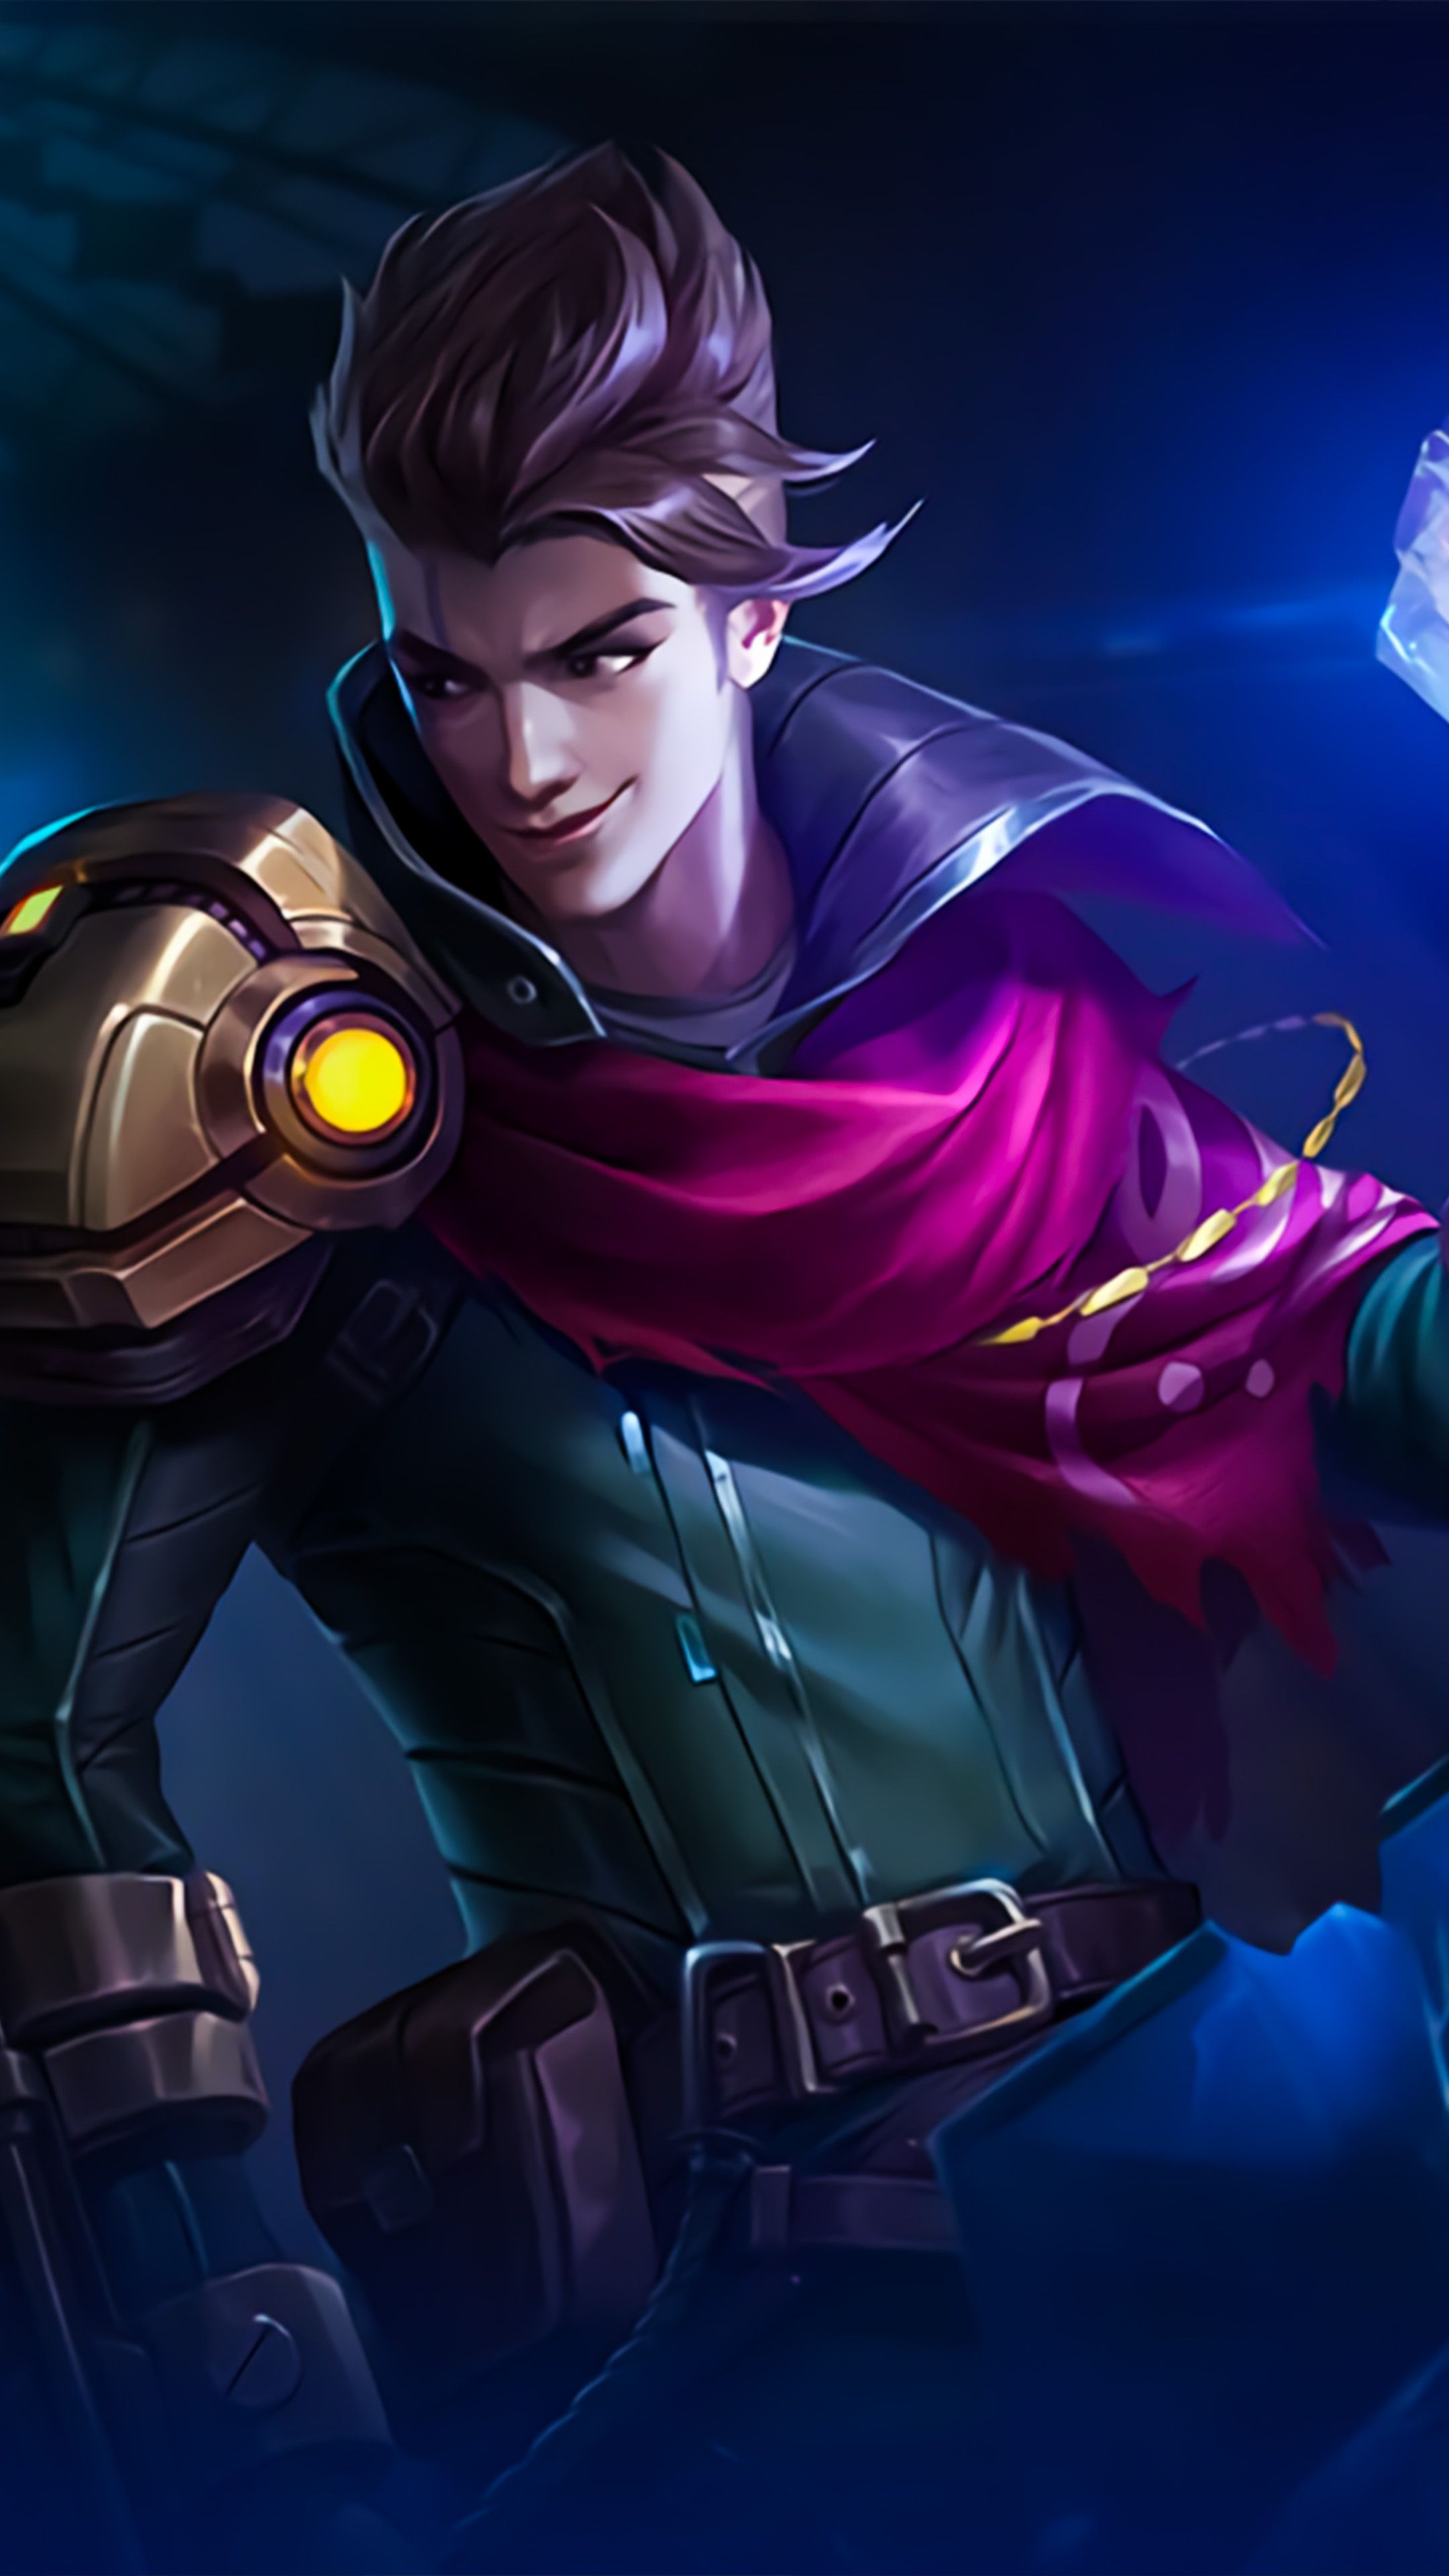 Claude Partners In Crime Mobile Legends Free 4K Ultra HD Mobile